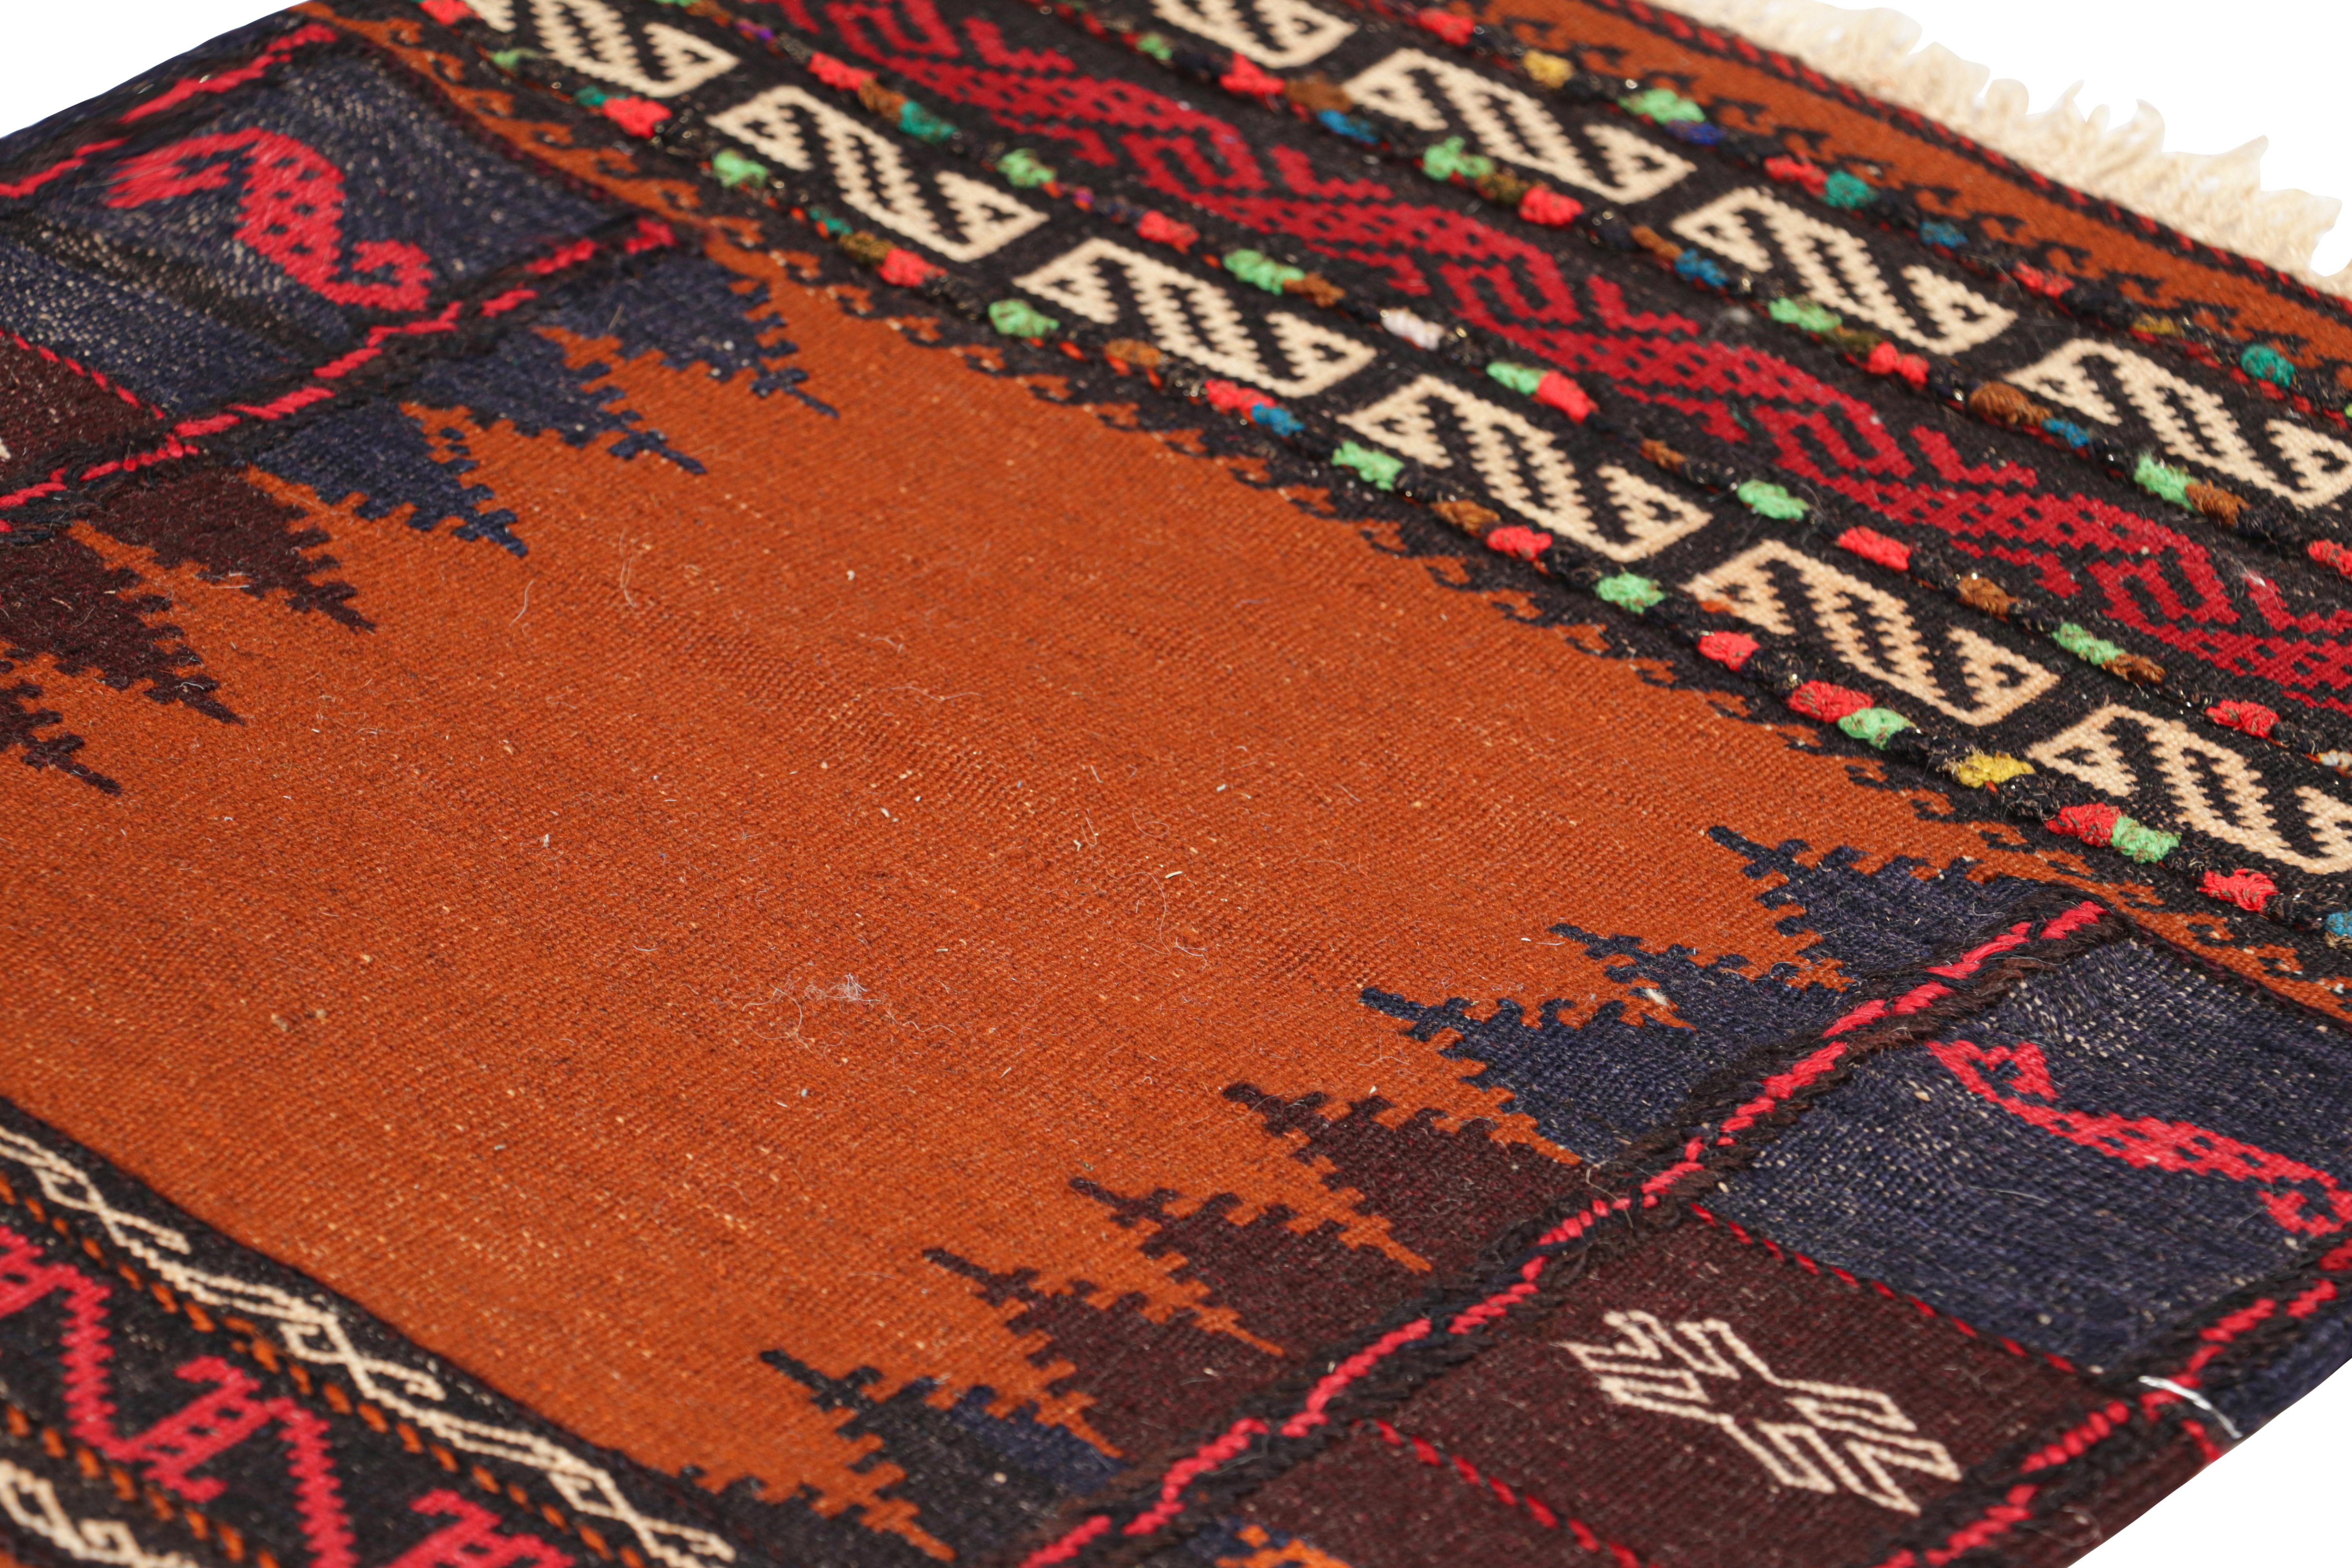 Hand-Woven Vintage Afghan Kilim in Rust with Geometric Patterns, from Rug & Kilim For Sale